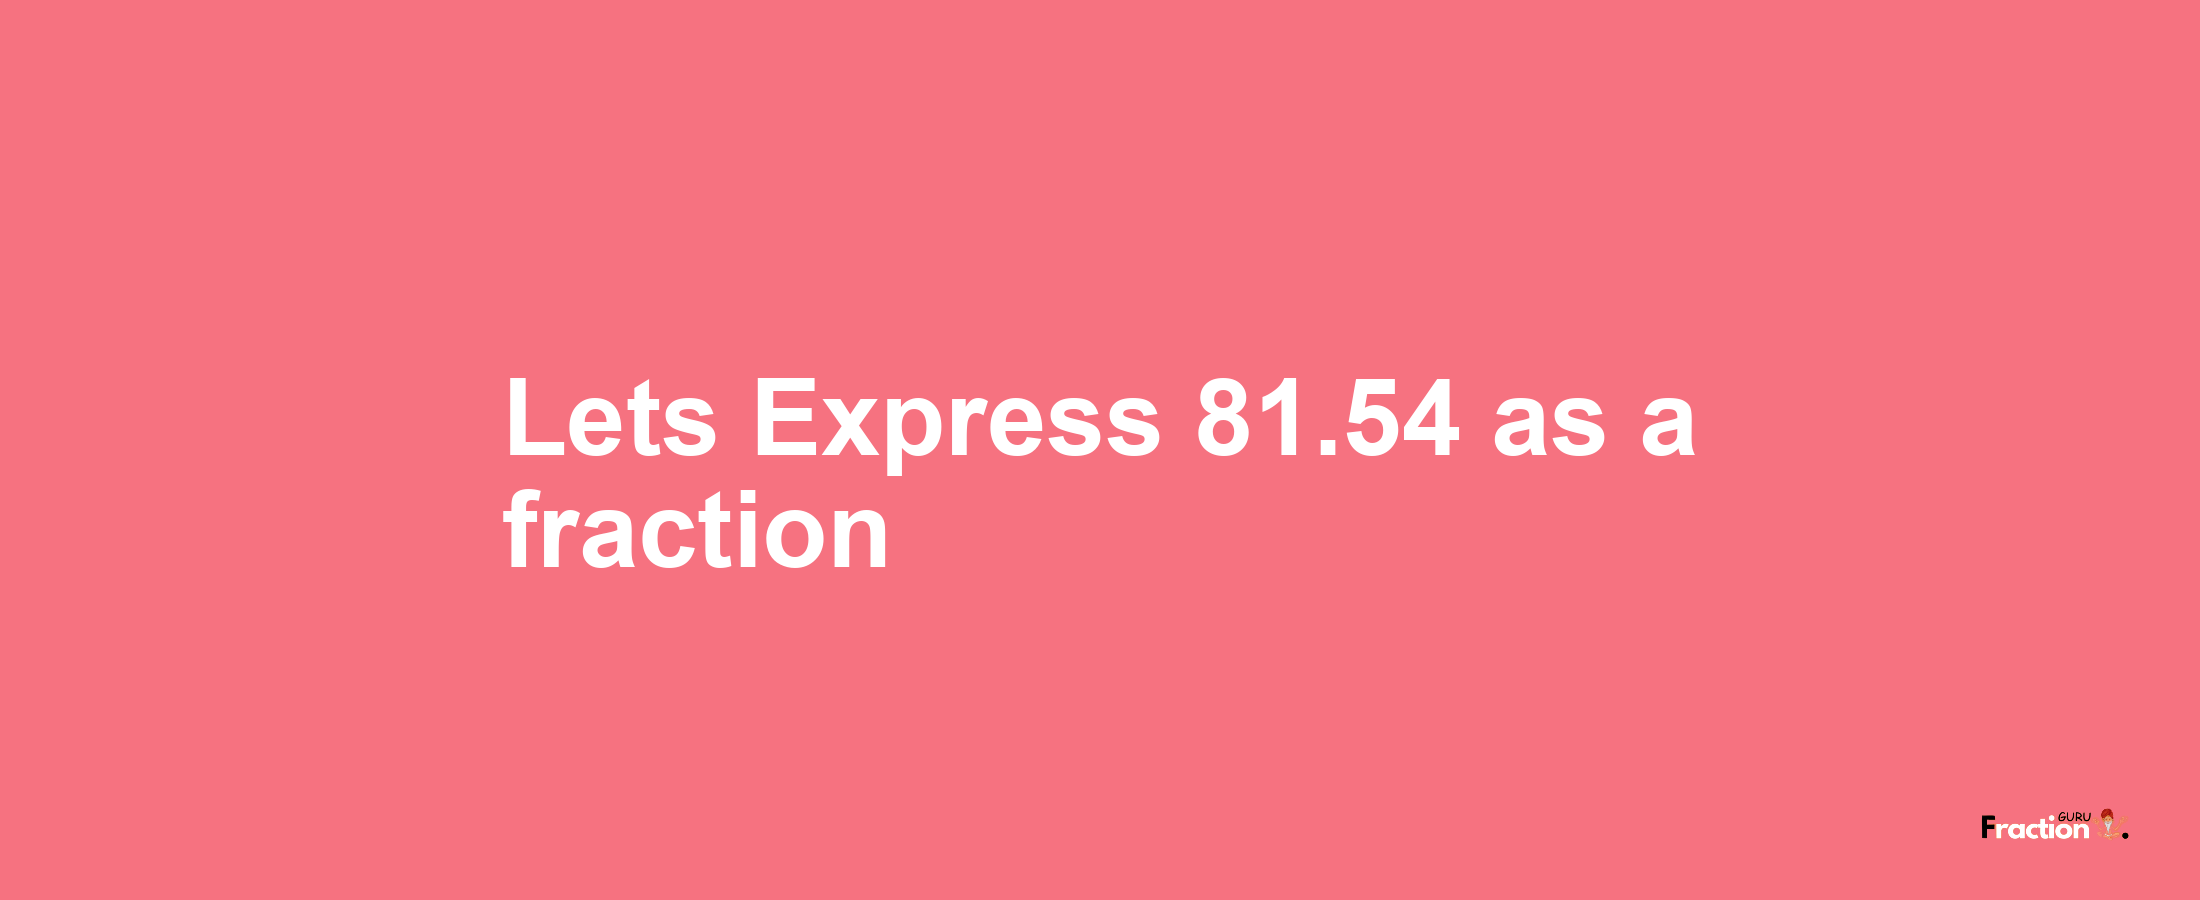 Lets Express 81.54 as afraction